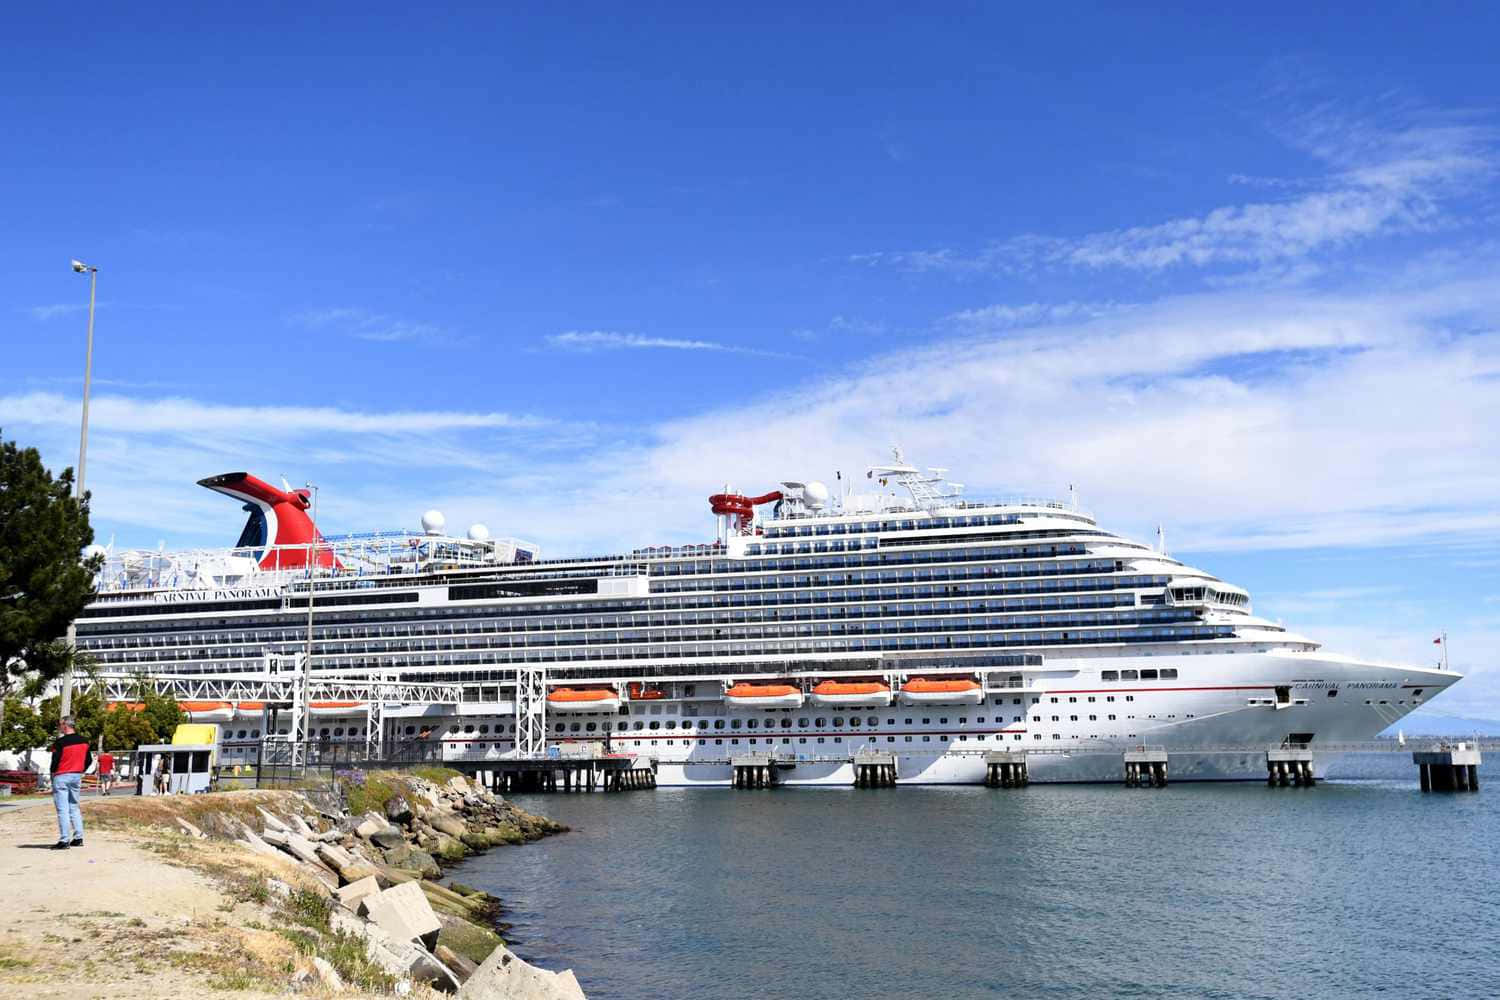 Sail away on board the Carnival Dream!